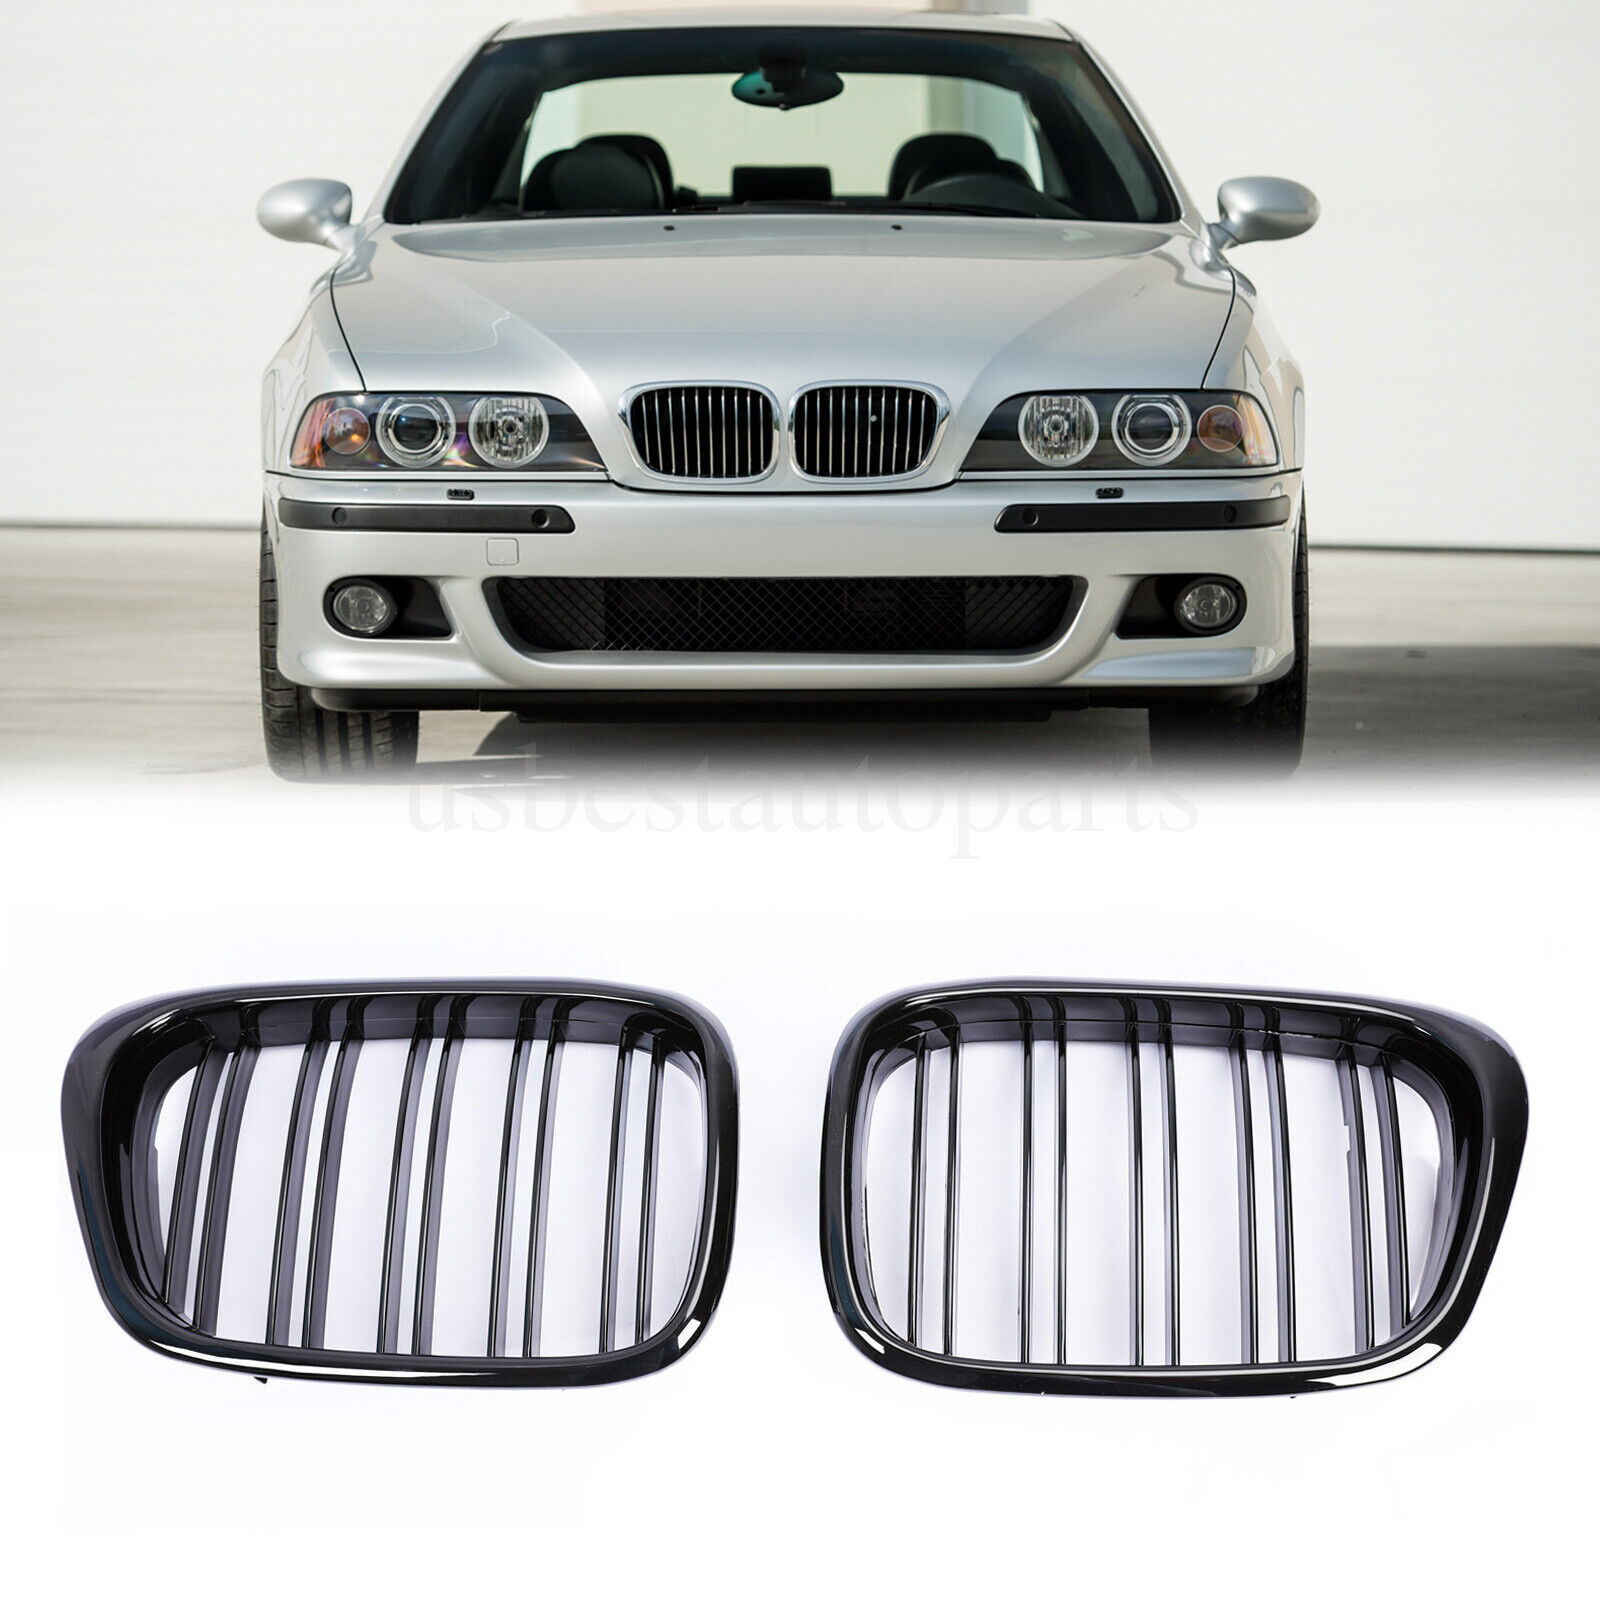 Gloss Black Front Kidney Grilles Grill for BMW 5 Series E39 M5 97-03 540i 530i